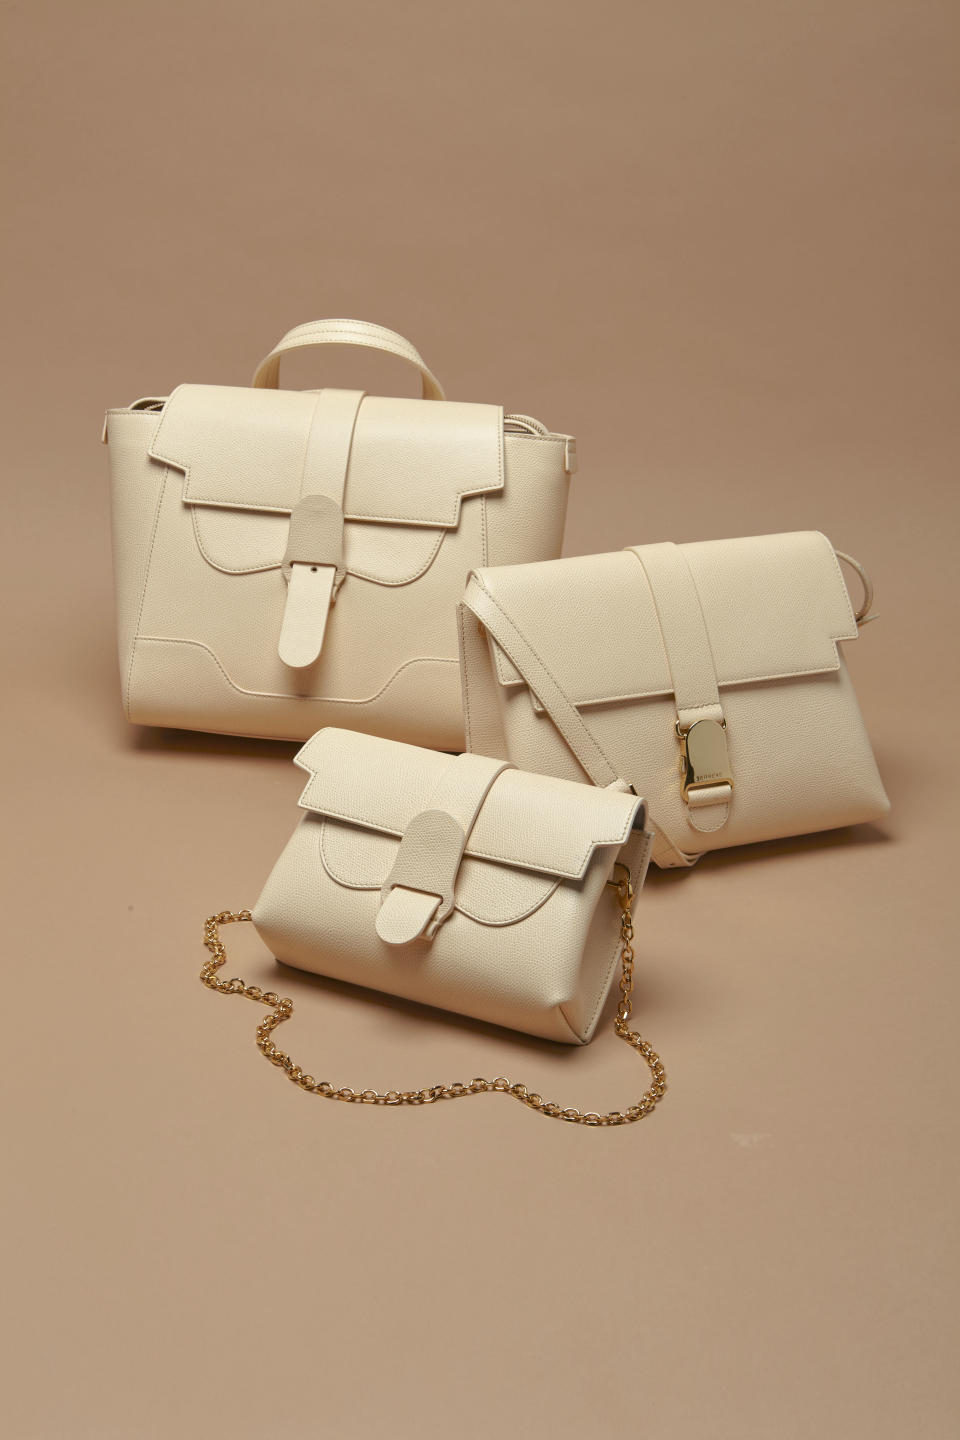 Senreve’s Aria, Midi Maestra, Cadence Shoulder bags in a Chablis colorway in collaboration with M.M. LaFleur.